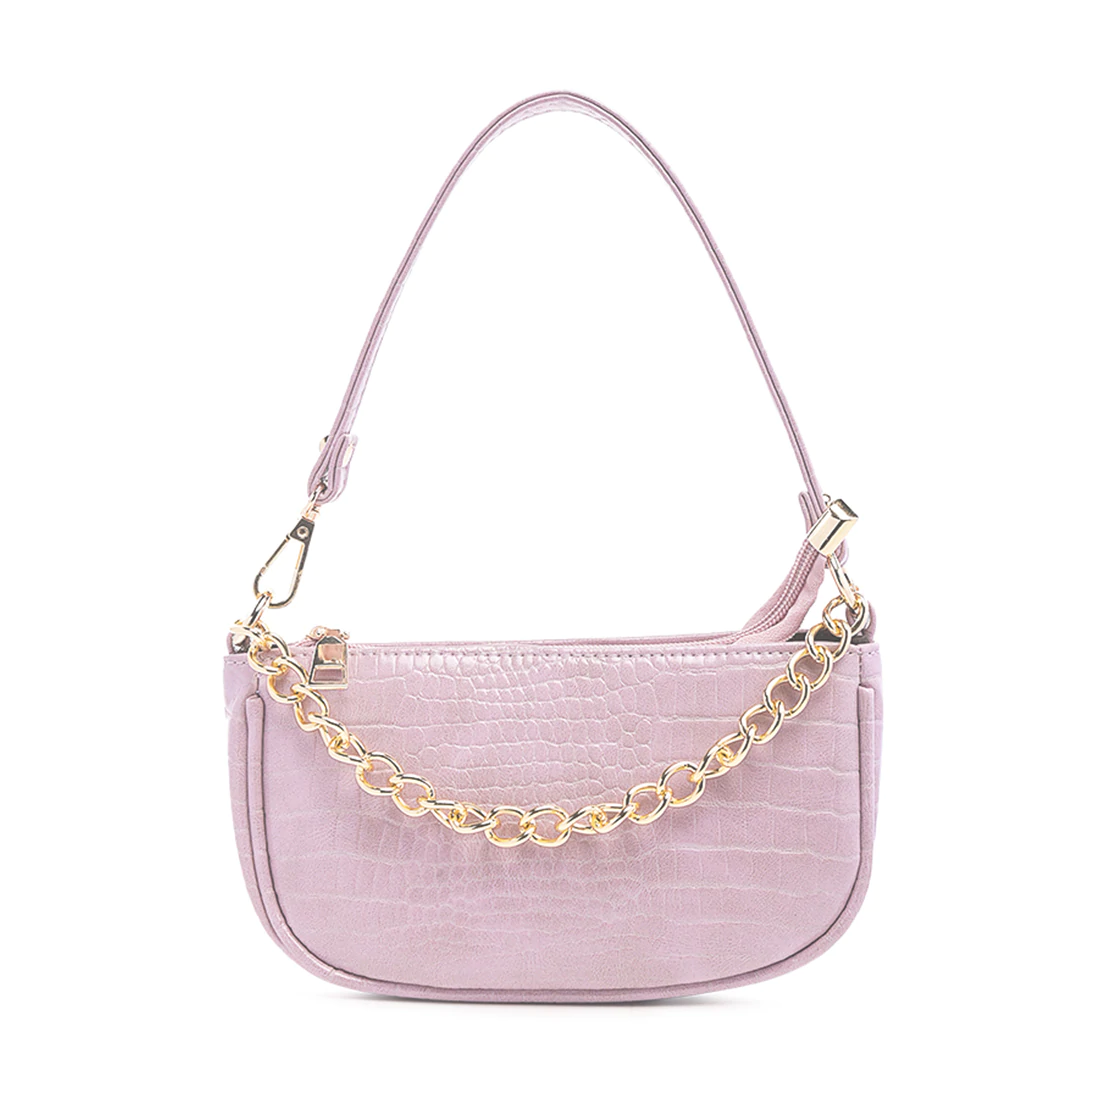 CROC SLING BAG IN LILAC